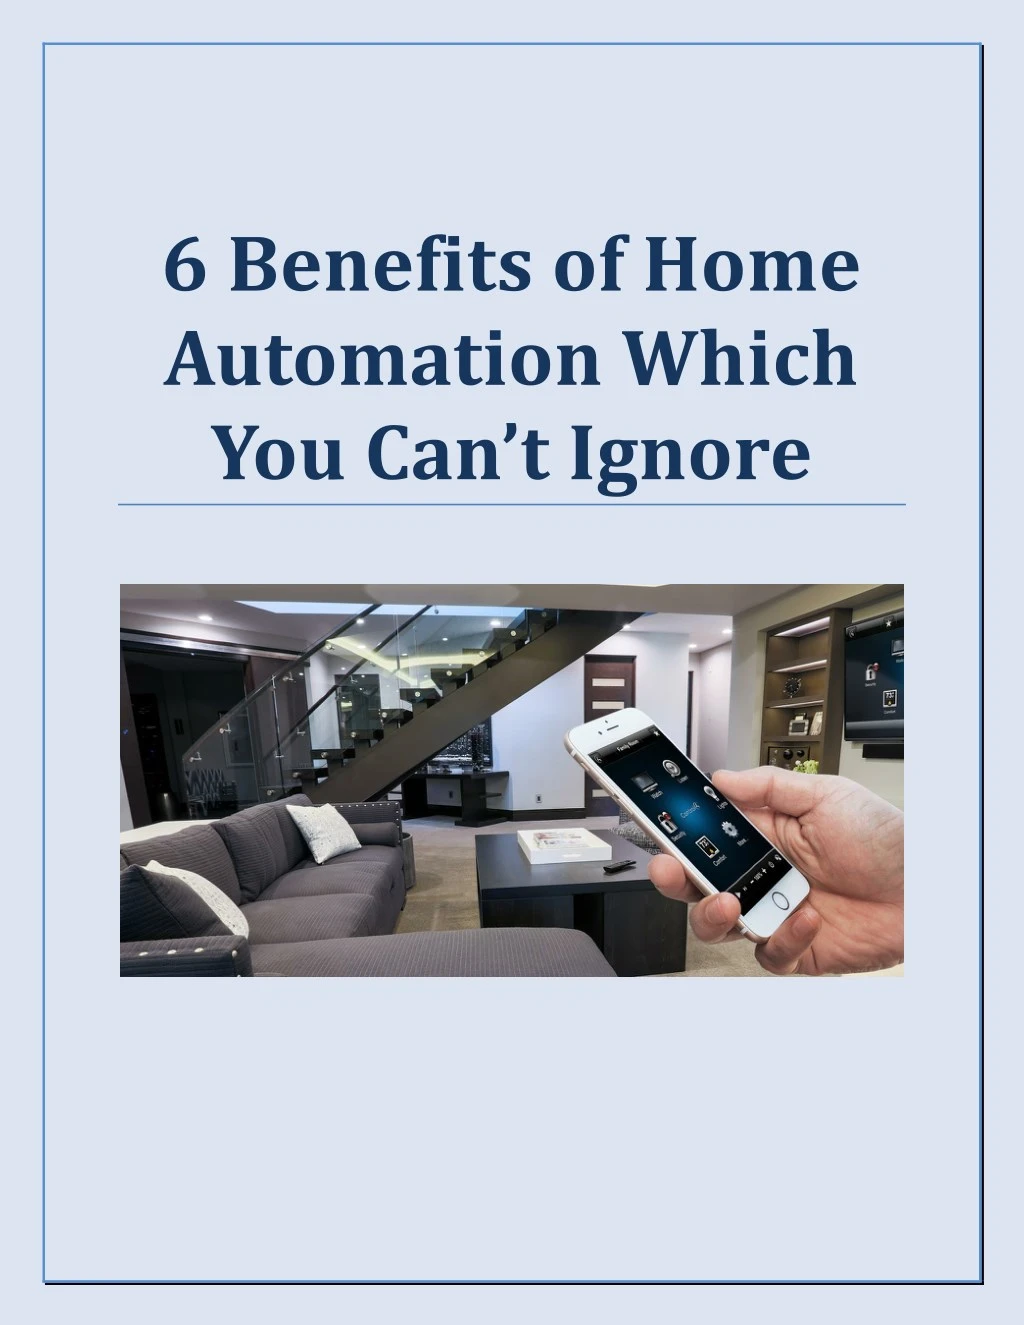 6 benefits of home automation which